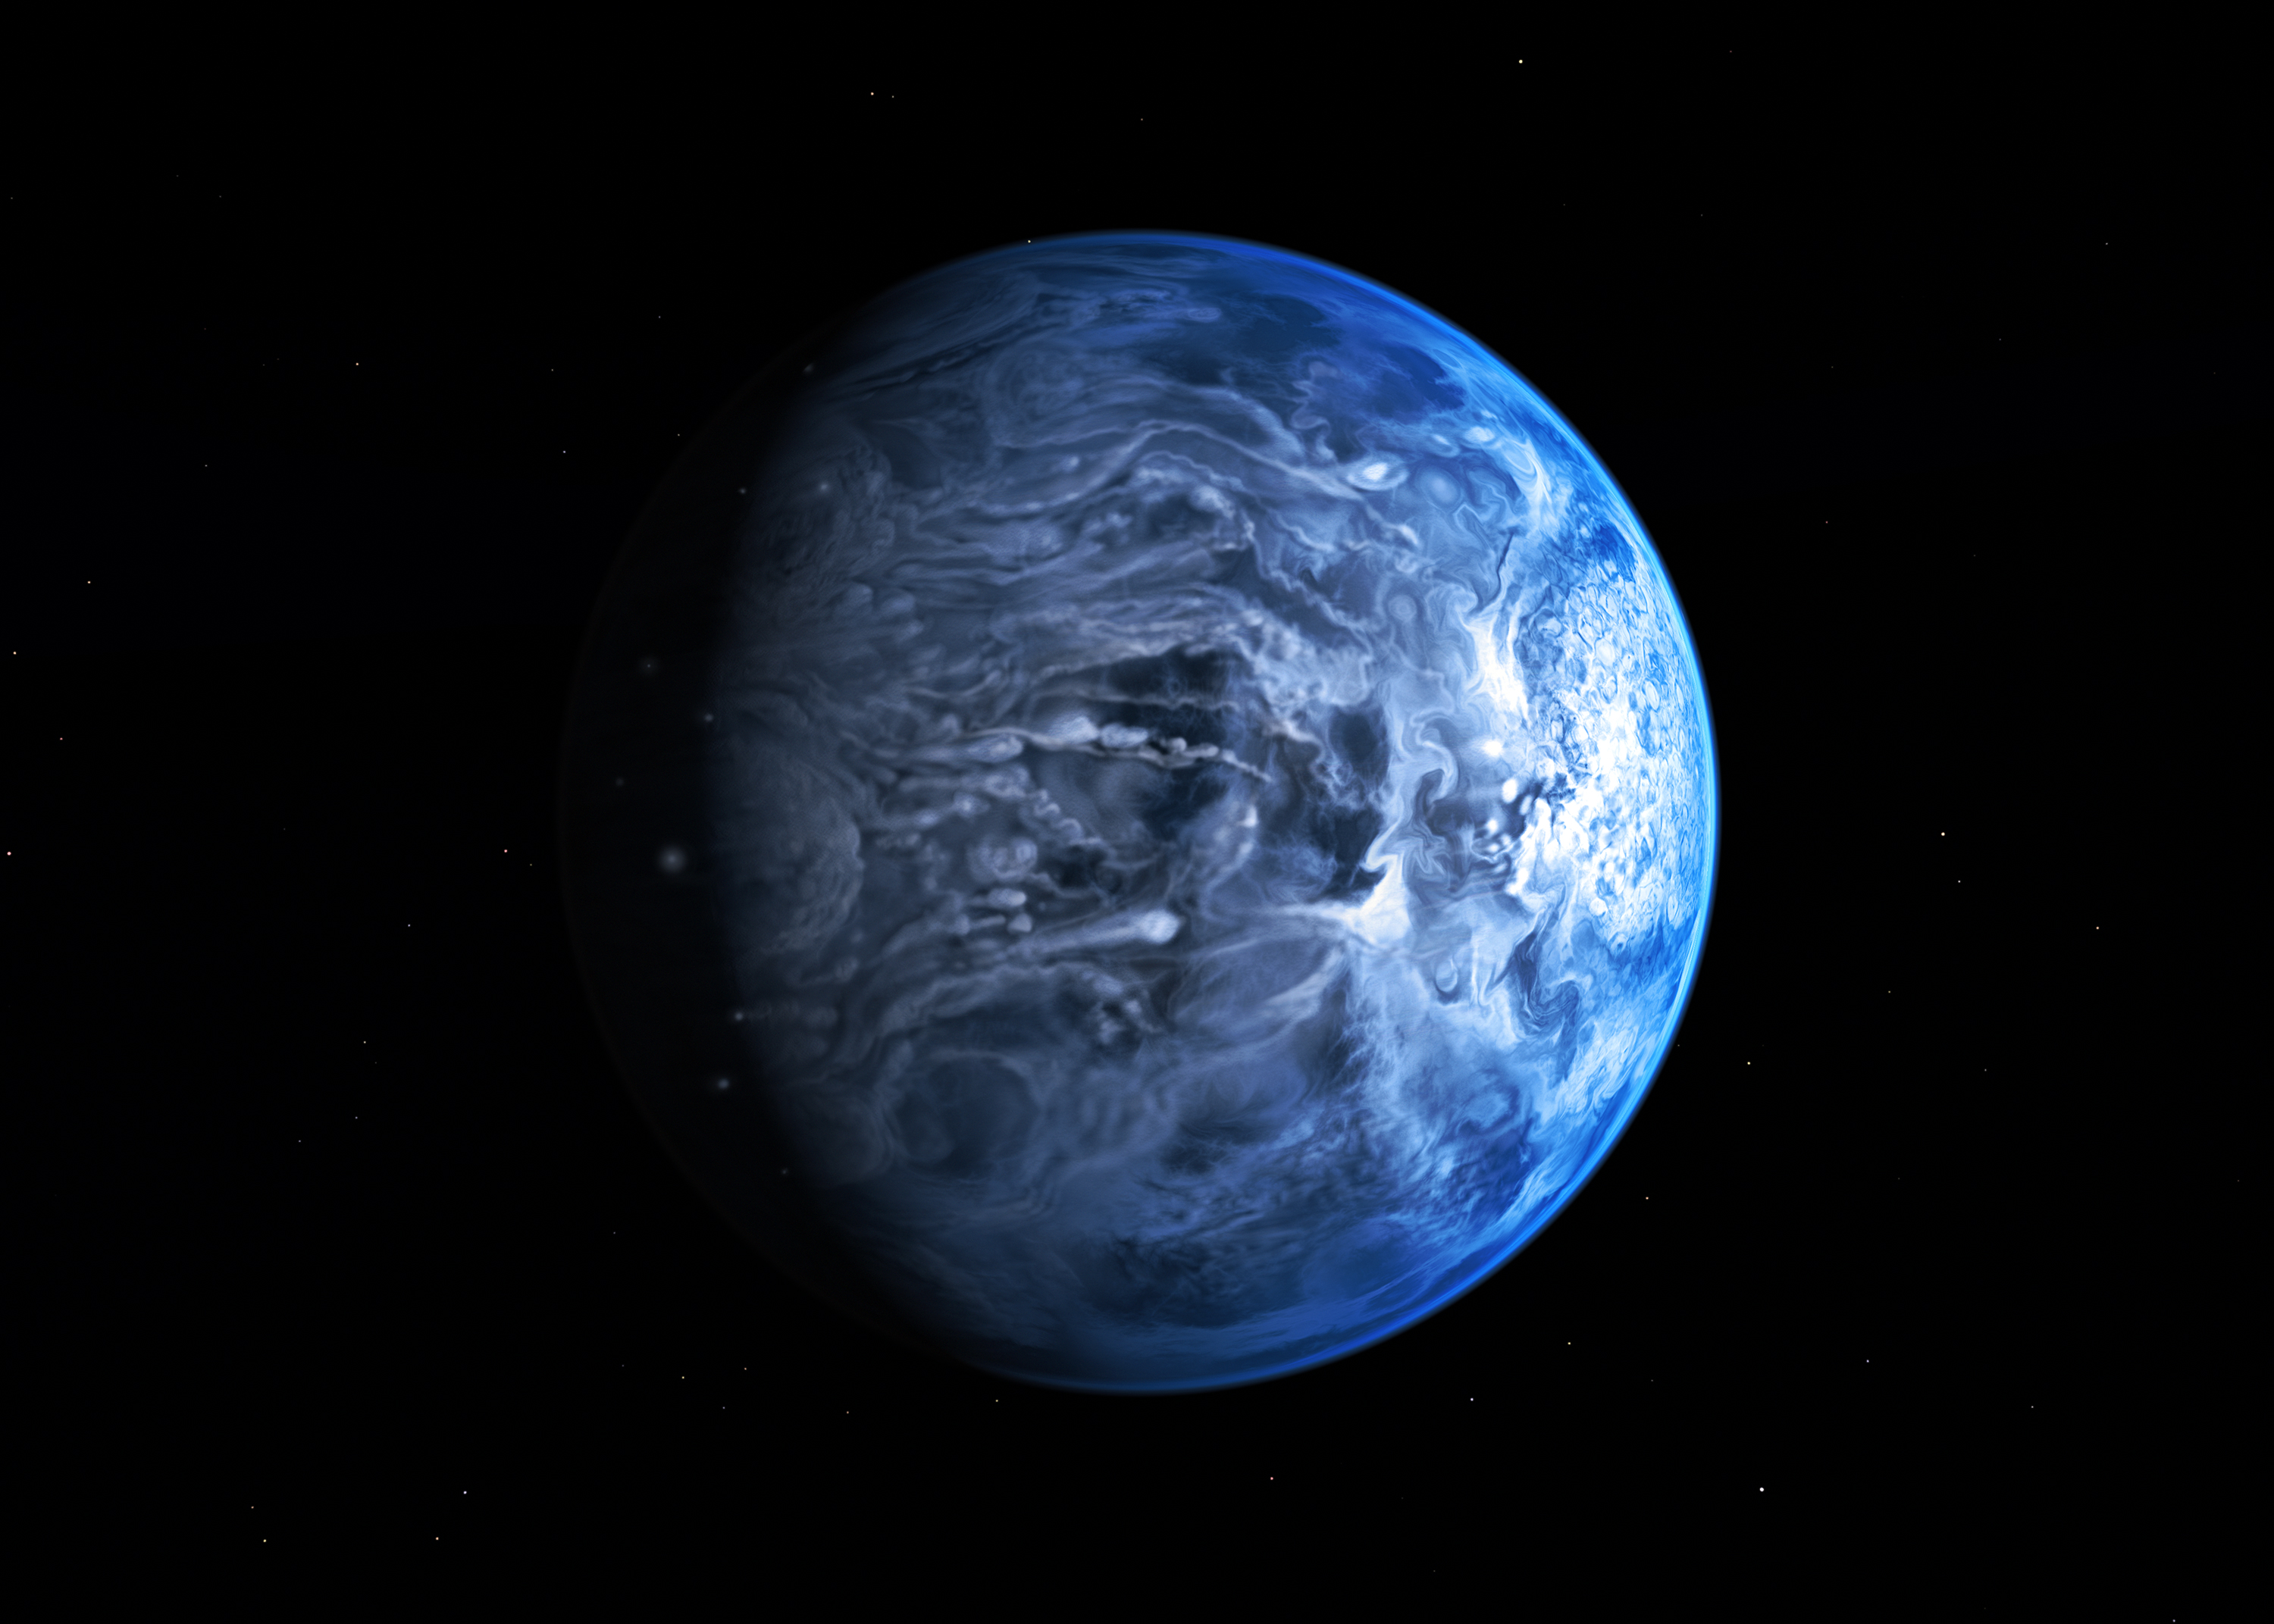 An artist's interpretation of HD 189733. It looks nice and blue, but it's actually a nightmare world that could be raining glass with 2 km/s winds. Credit: ESO/M. Kornmesser